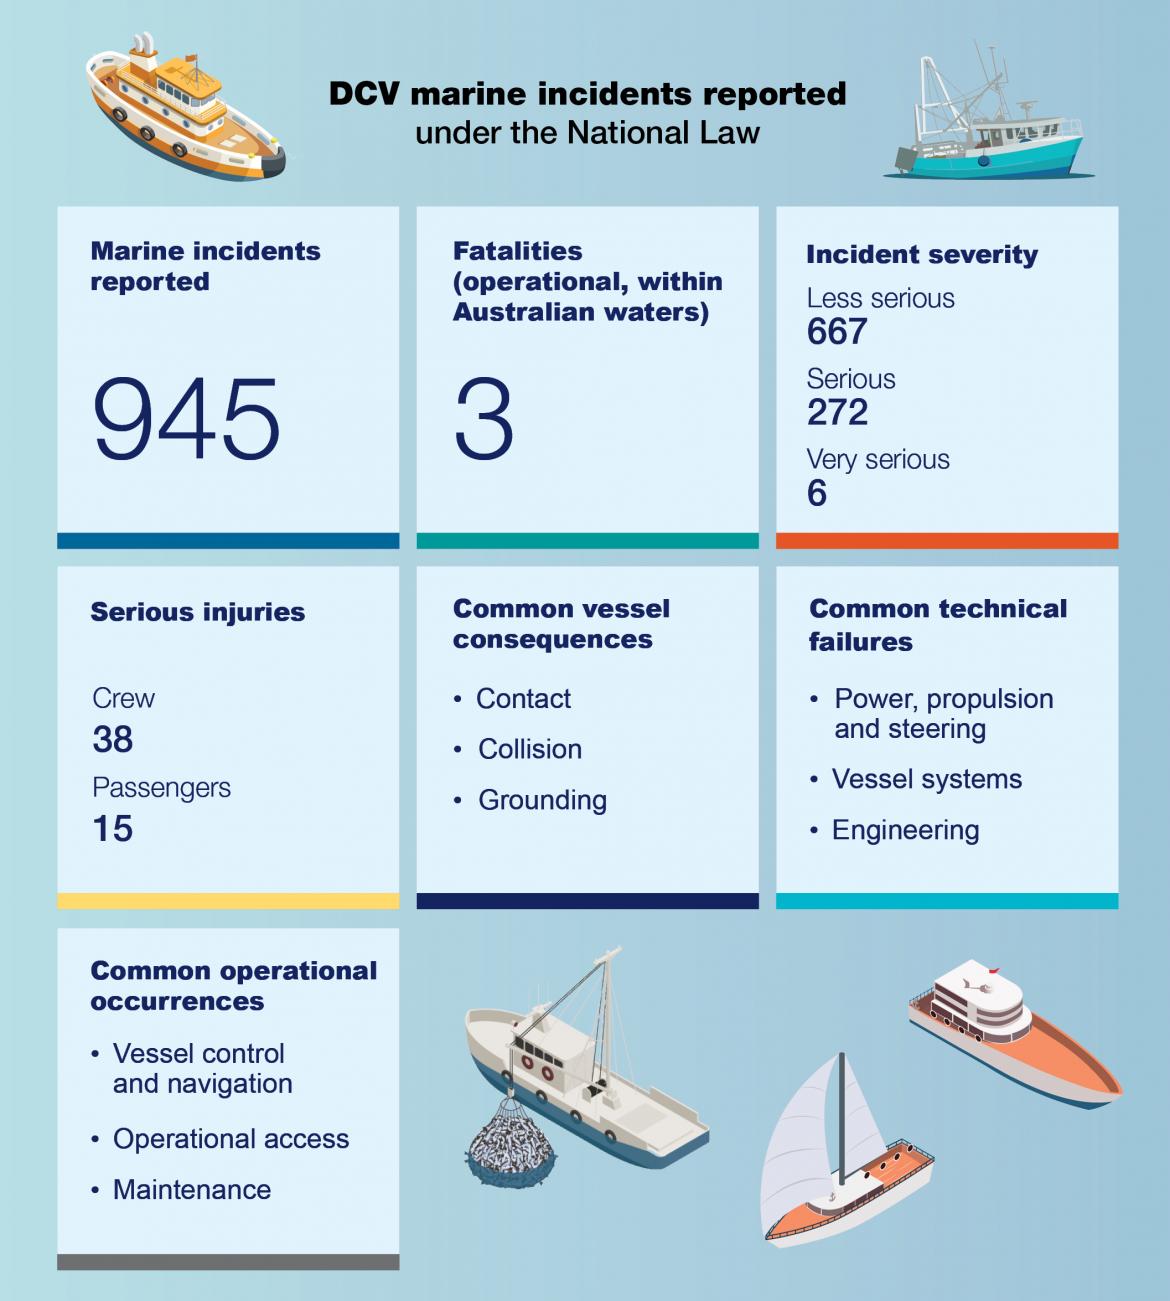 Image 2: Summary of marine incidents reported for Domestic Commercial Vessels (DCVs) in 2021